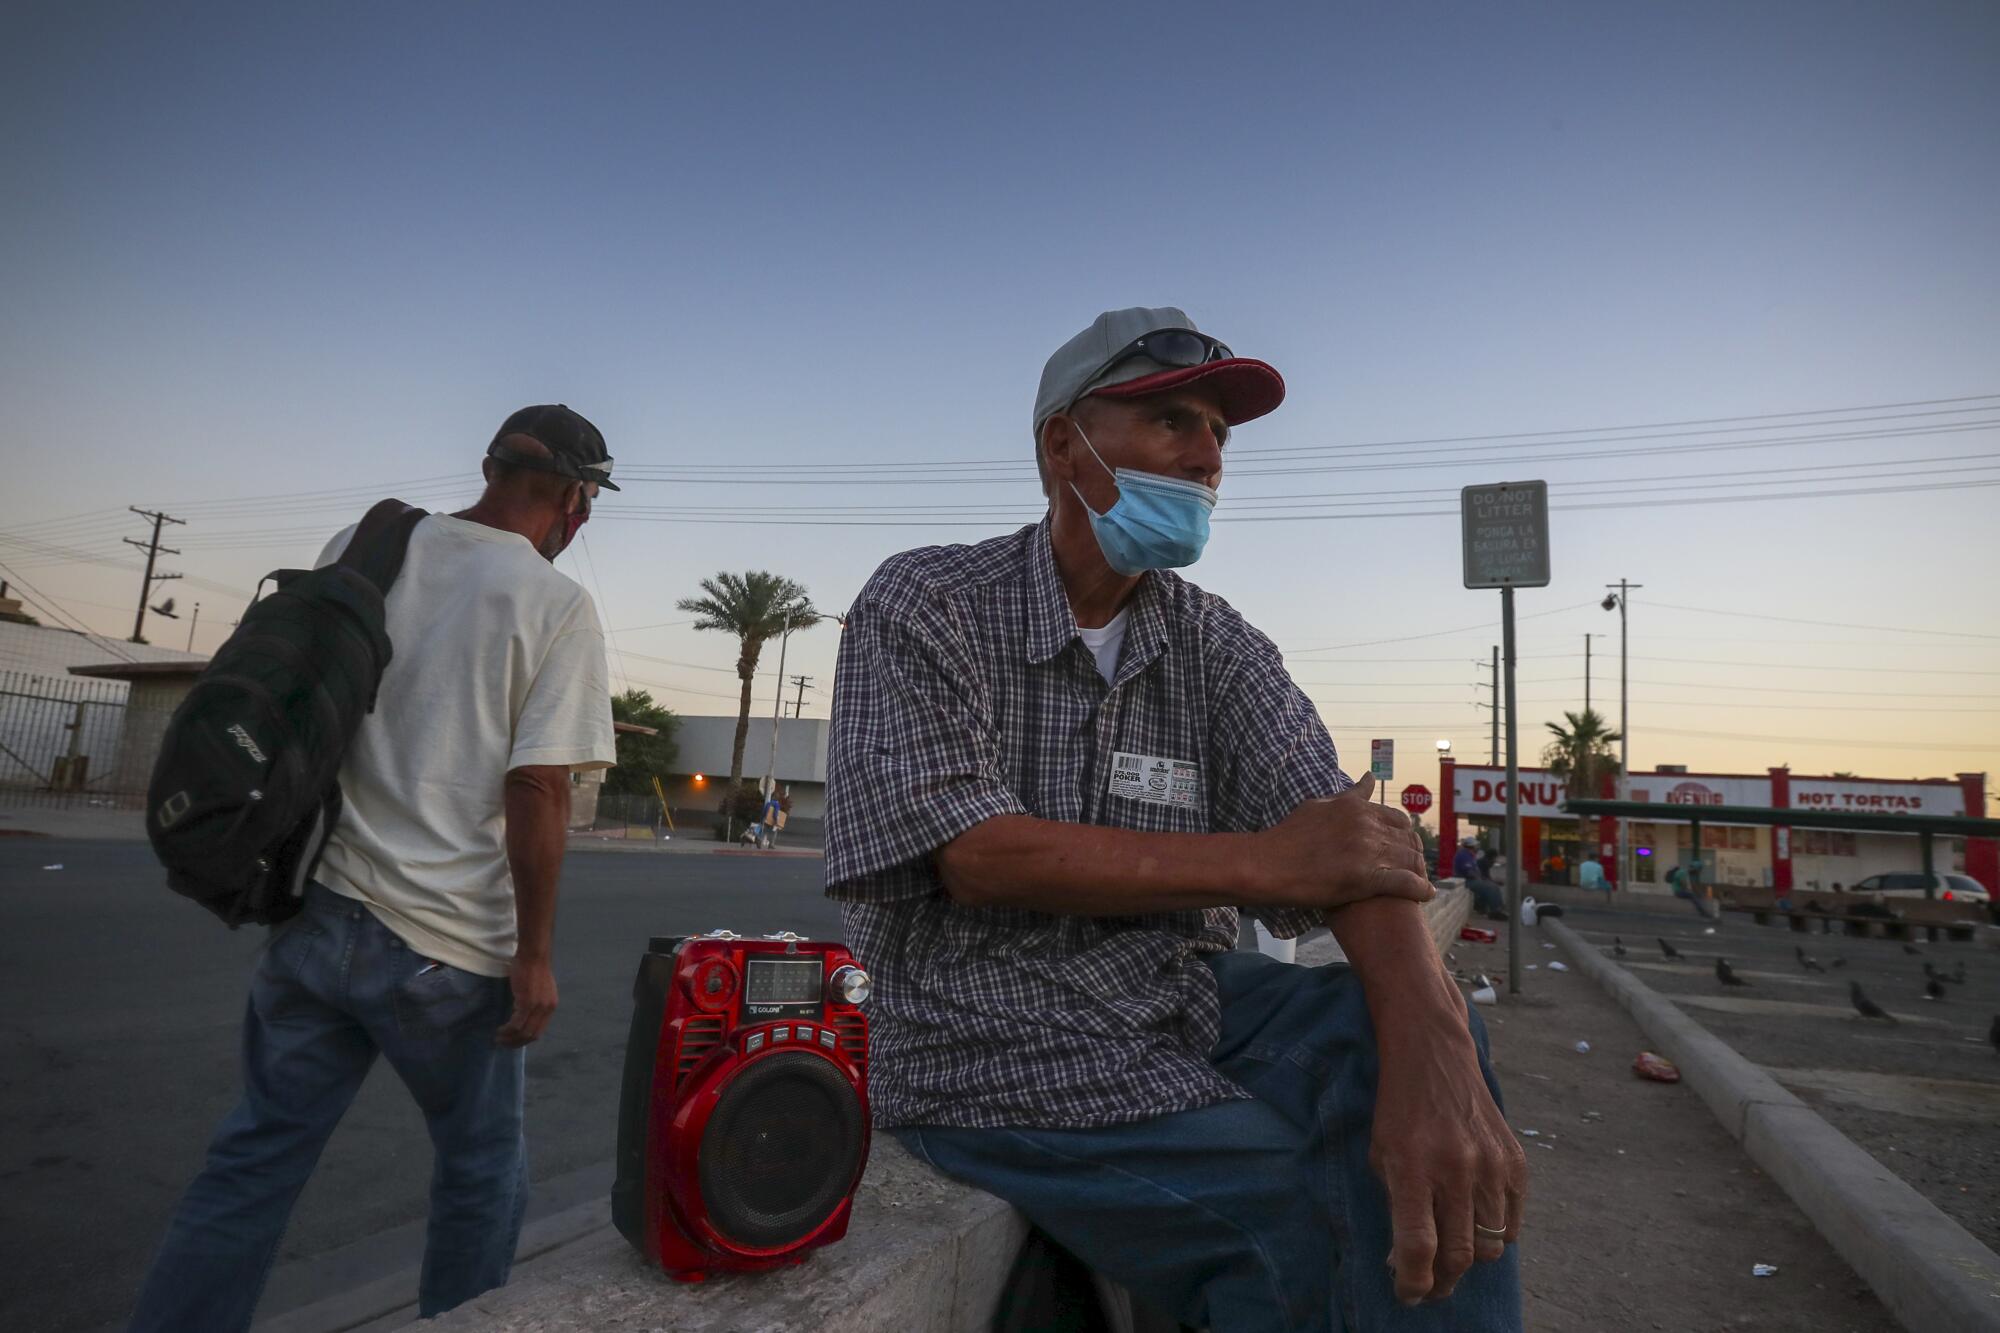 Manuel Espinoso, 65, waits for a job while sitting outside a doughnut shop on Pauline Avenue in Calexico.